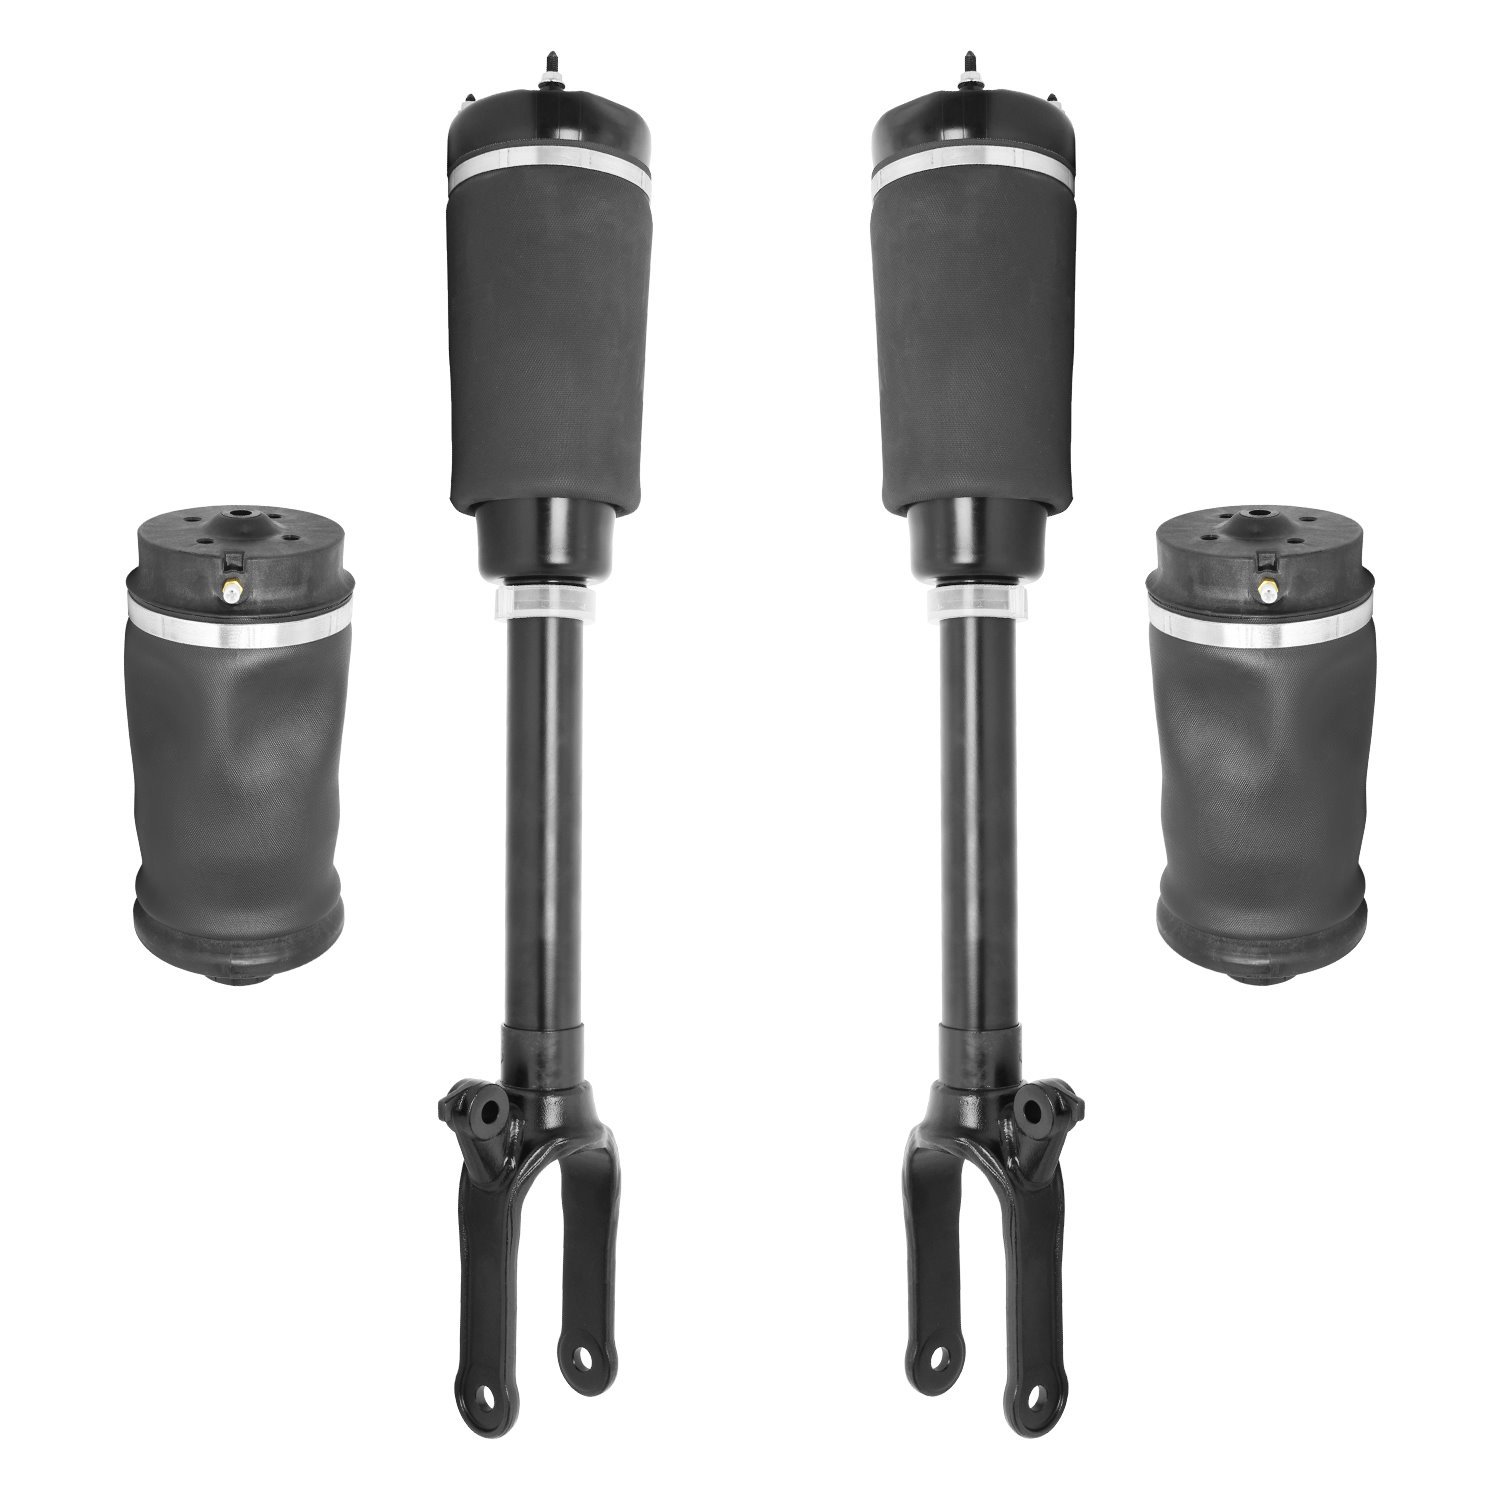 4-18-112900 Front & Rear Non-Electronic Suspension Air Strut Assembly Kit Fits Select Mercedes-Benz